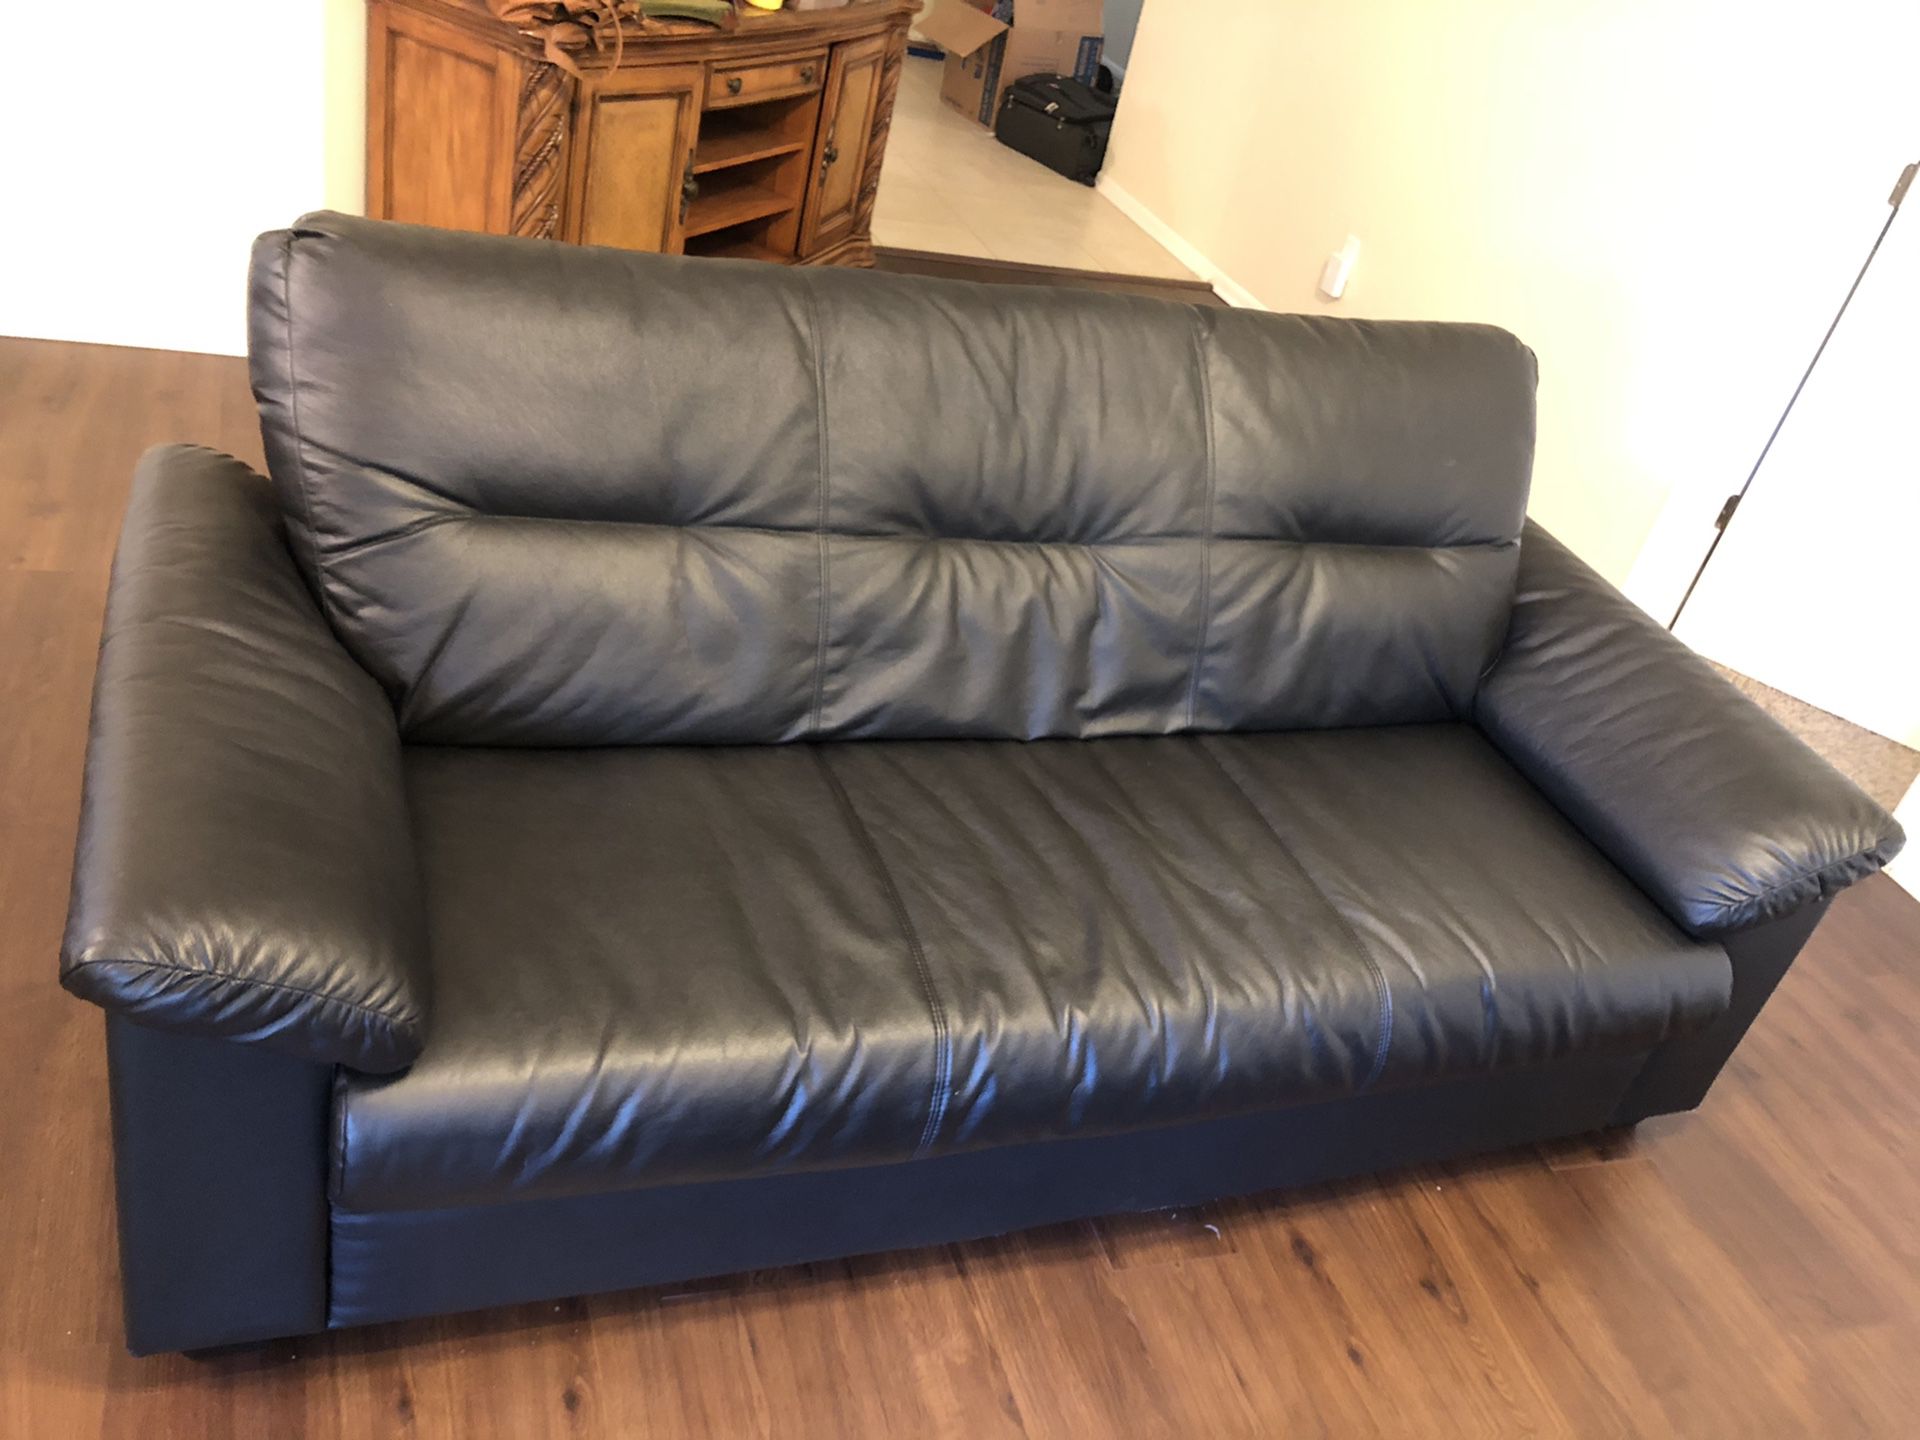 Black leather sofa couch